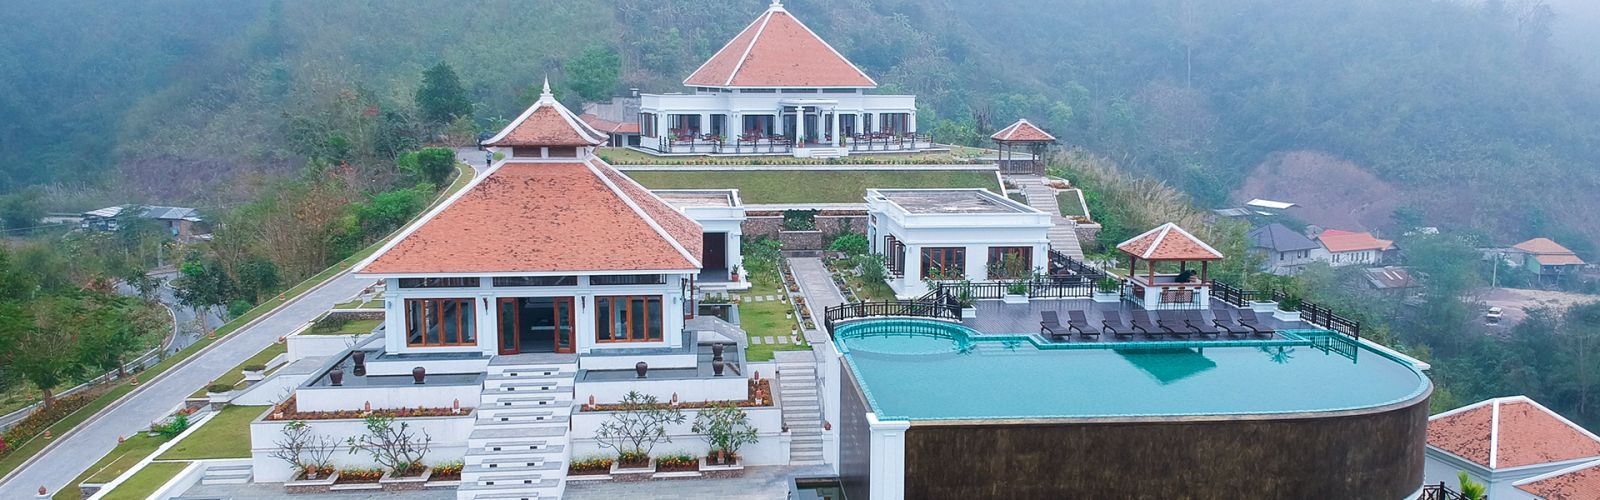 Hotels in Northern Laos